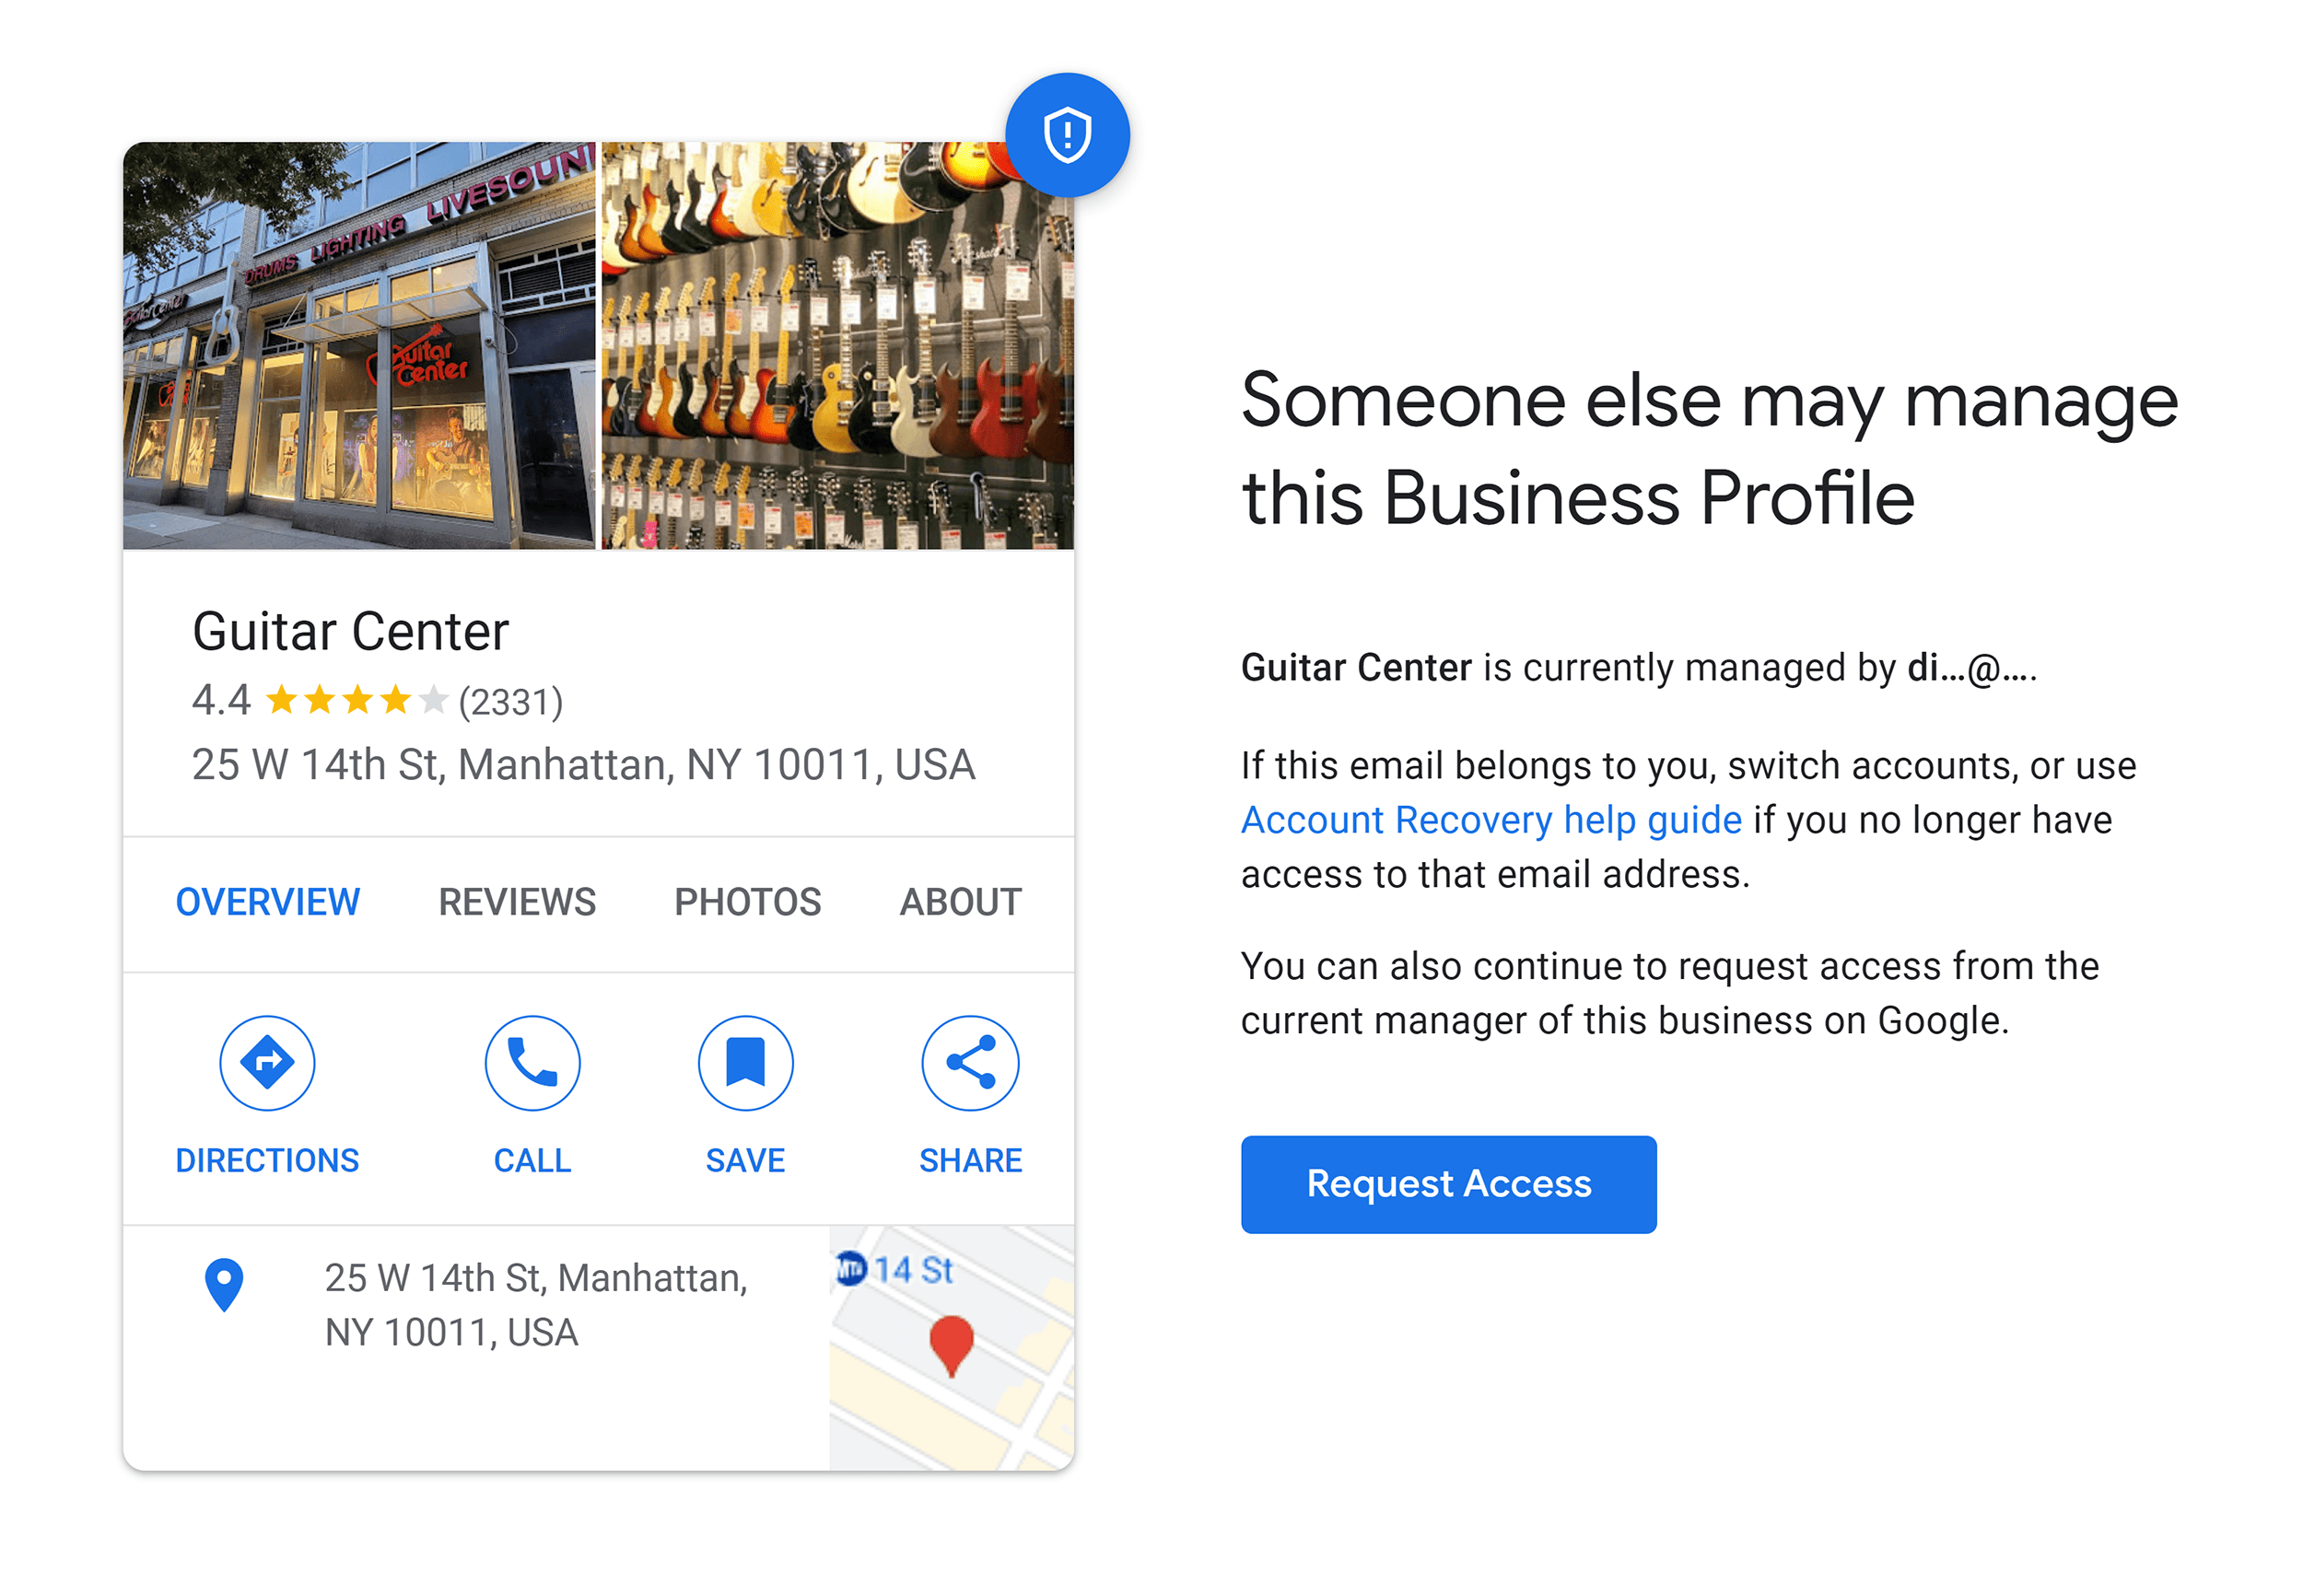 Request Access to Business Profile